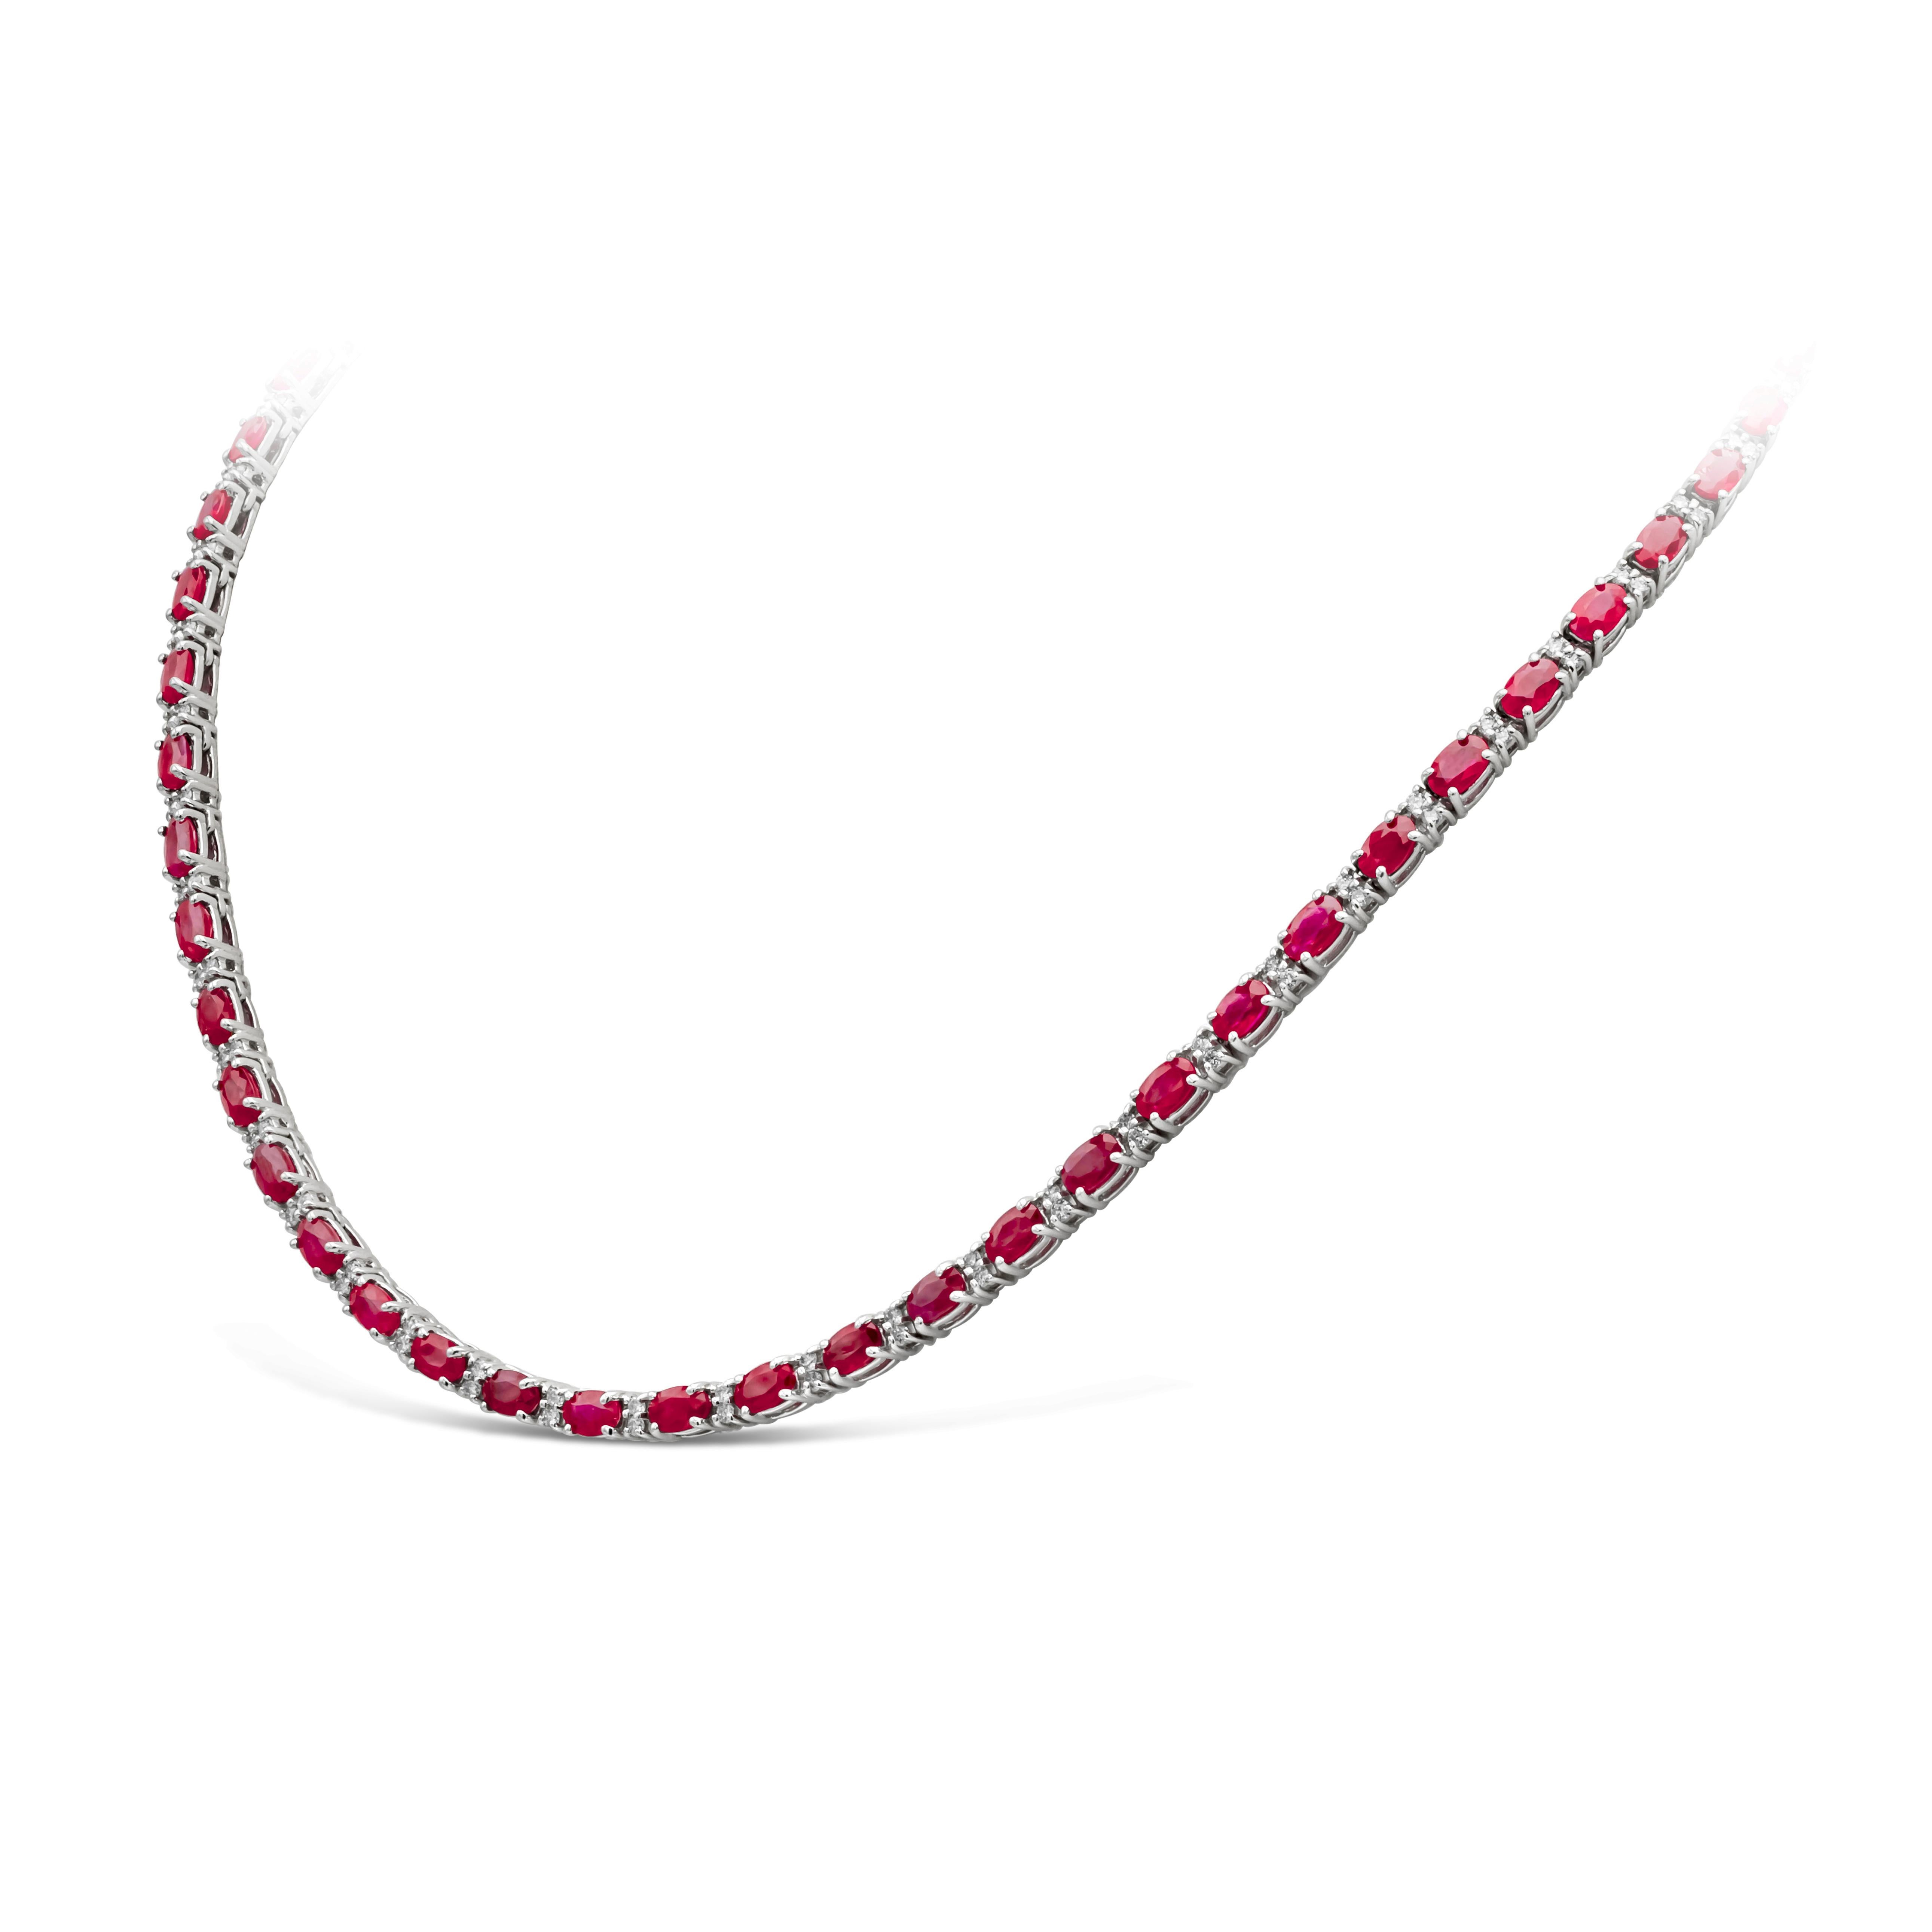 An incredibly color-rich tennis necklace showcasing 16.98 carats total oval cut red rubies, each elegantly spaced by two round brilliant diamonds weighing 1.49 carats total, F-G color and SI in clarity. Finely made in 14k white gold. Approximately